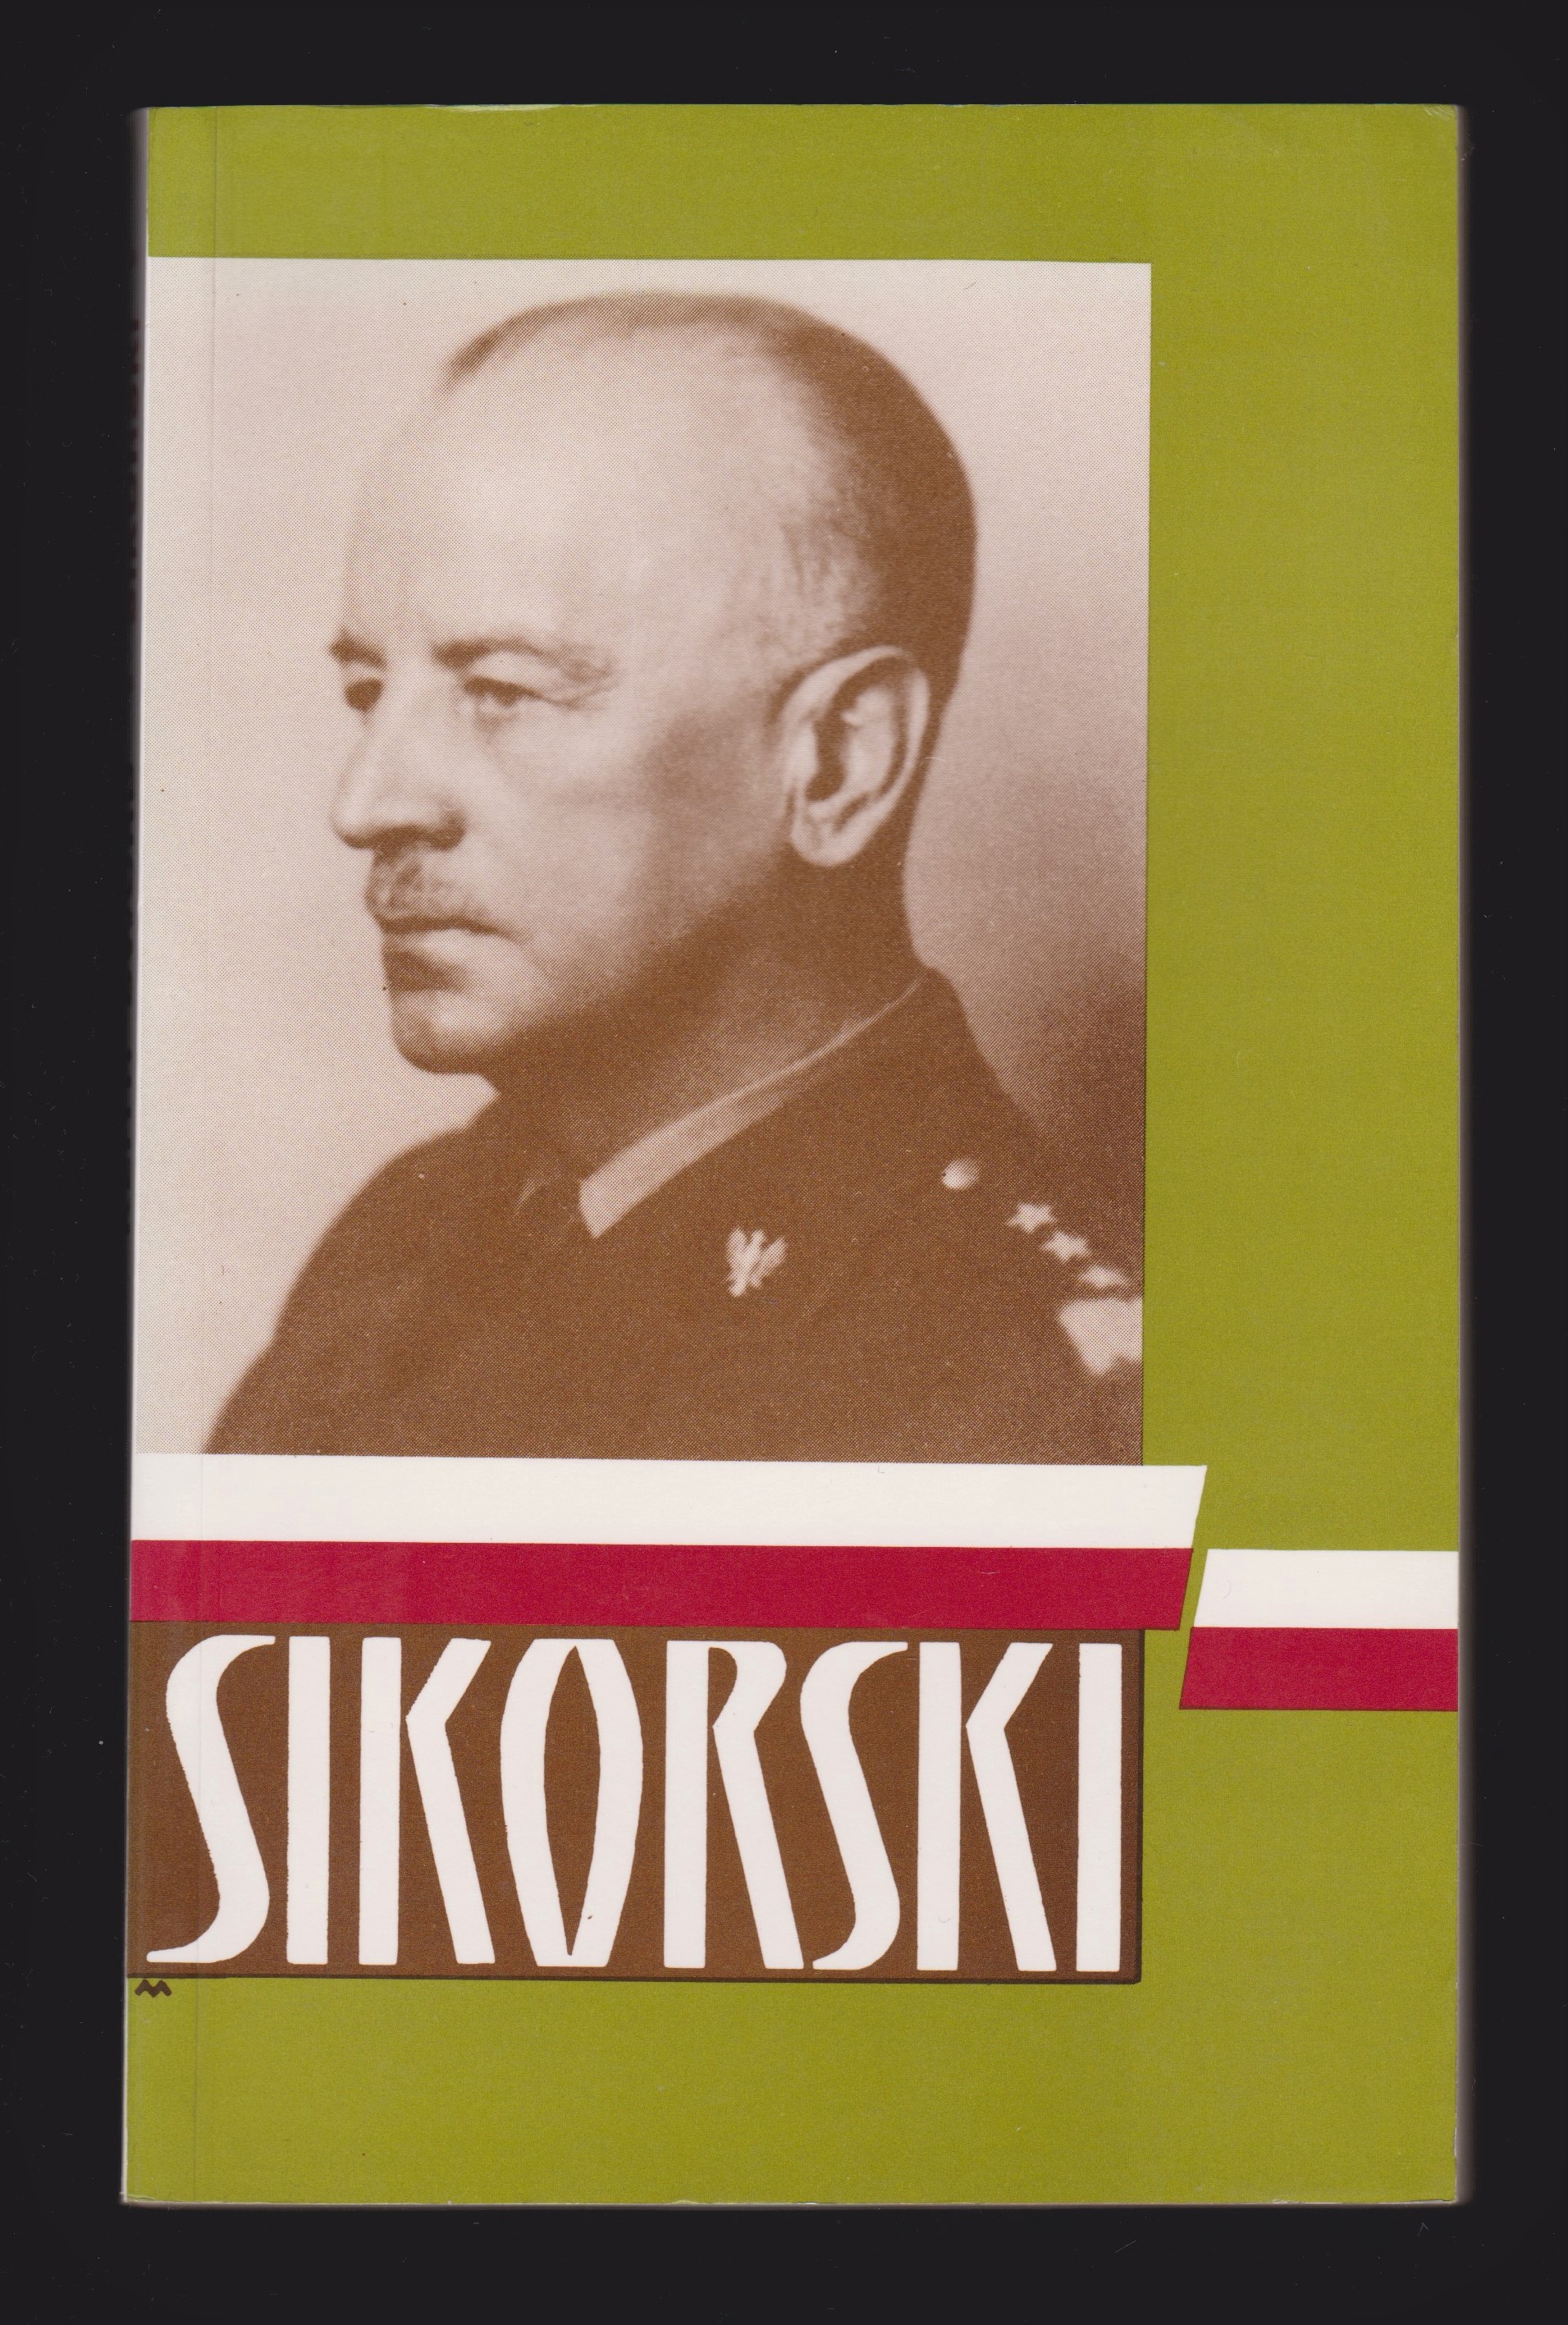 Sikorski: Soldier and Statesman - A Collection of Essays (SSEES Occasional Papers 8) - Keith Sword